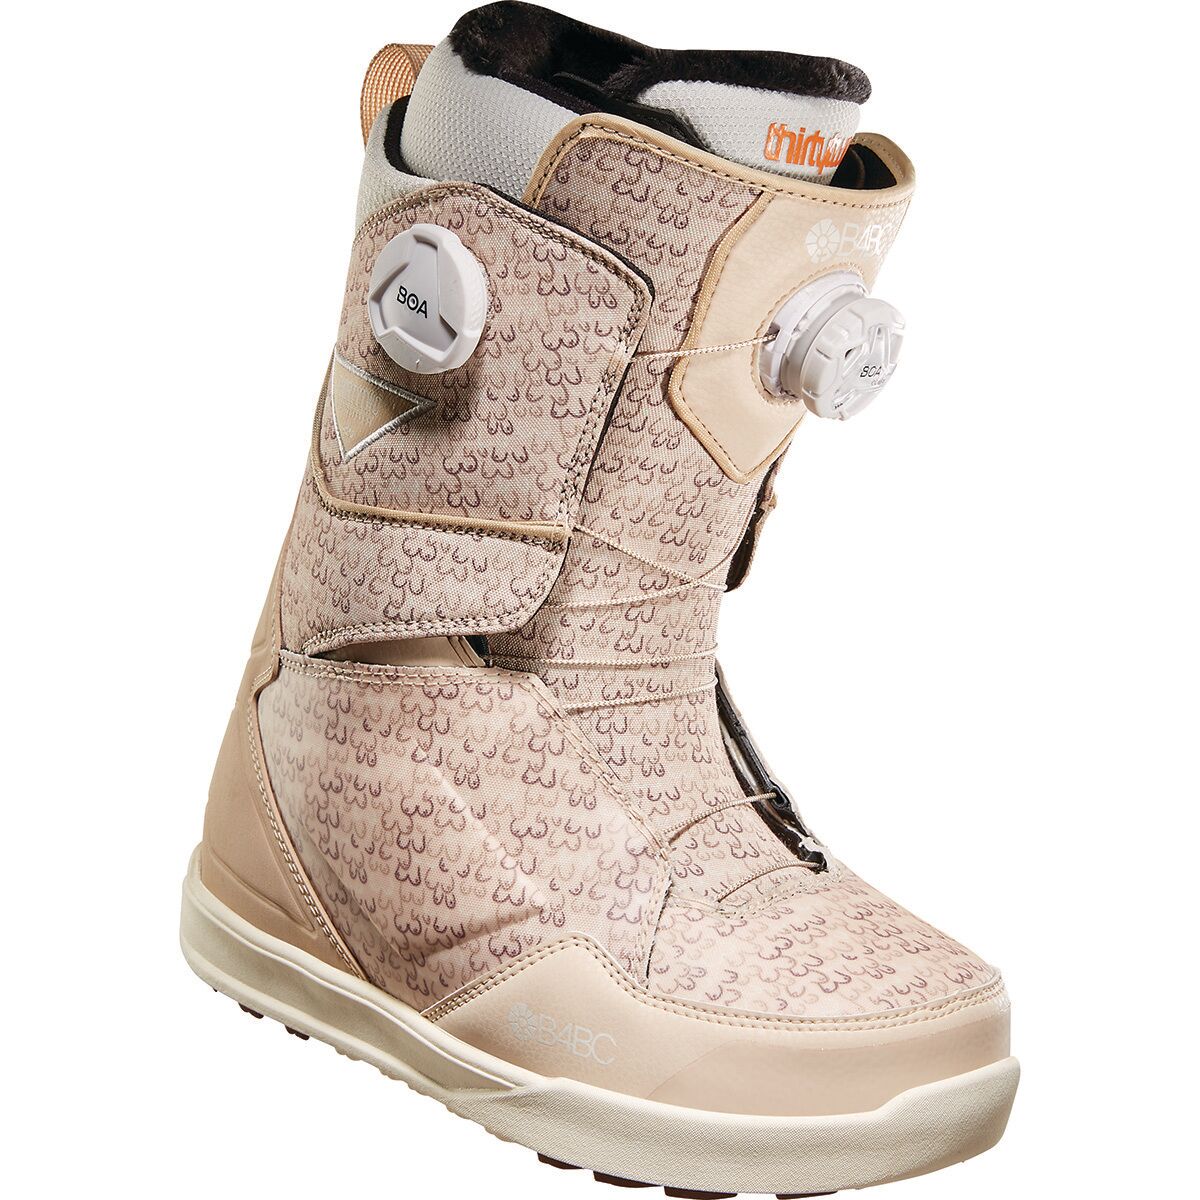 ThirtyTwo Lashed Double BOA B4BC Snowboard Boot - 2023 - Women's Ivory